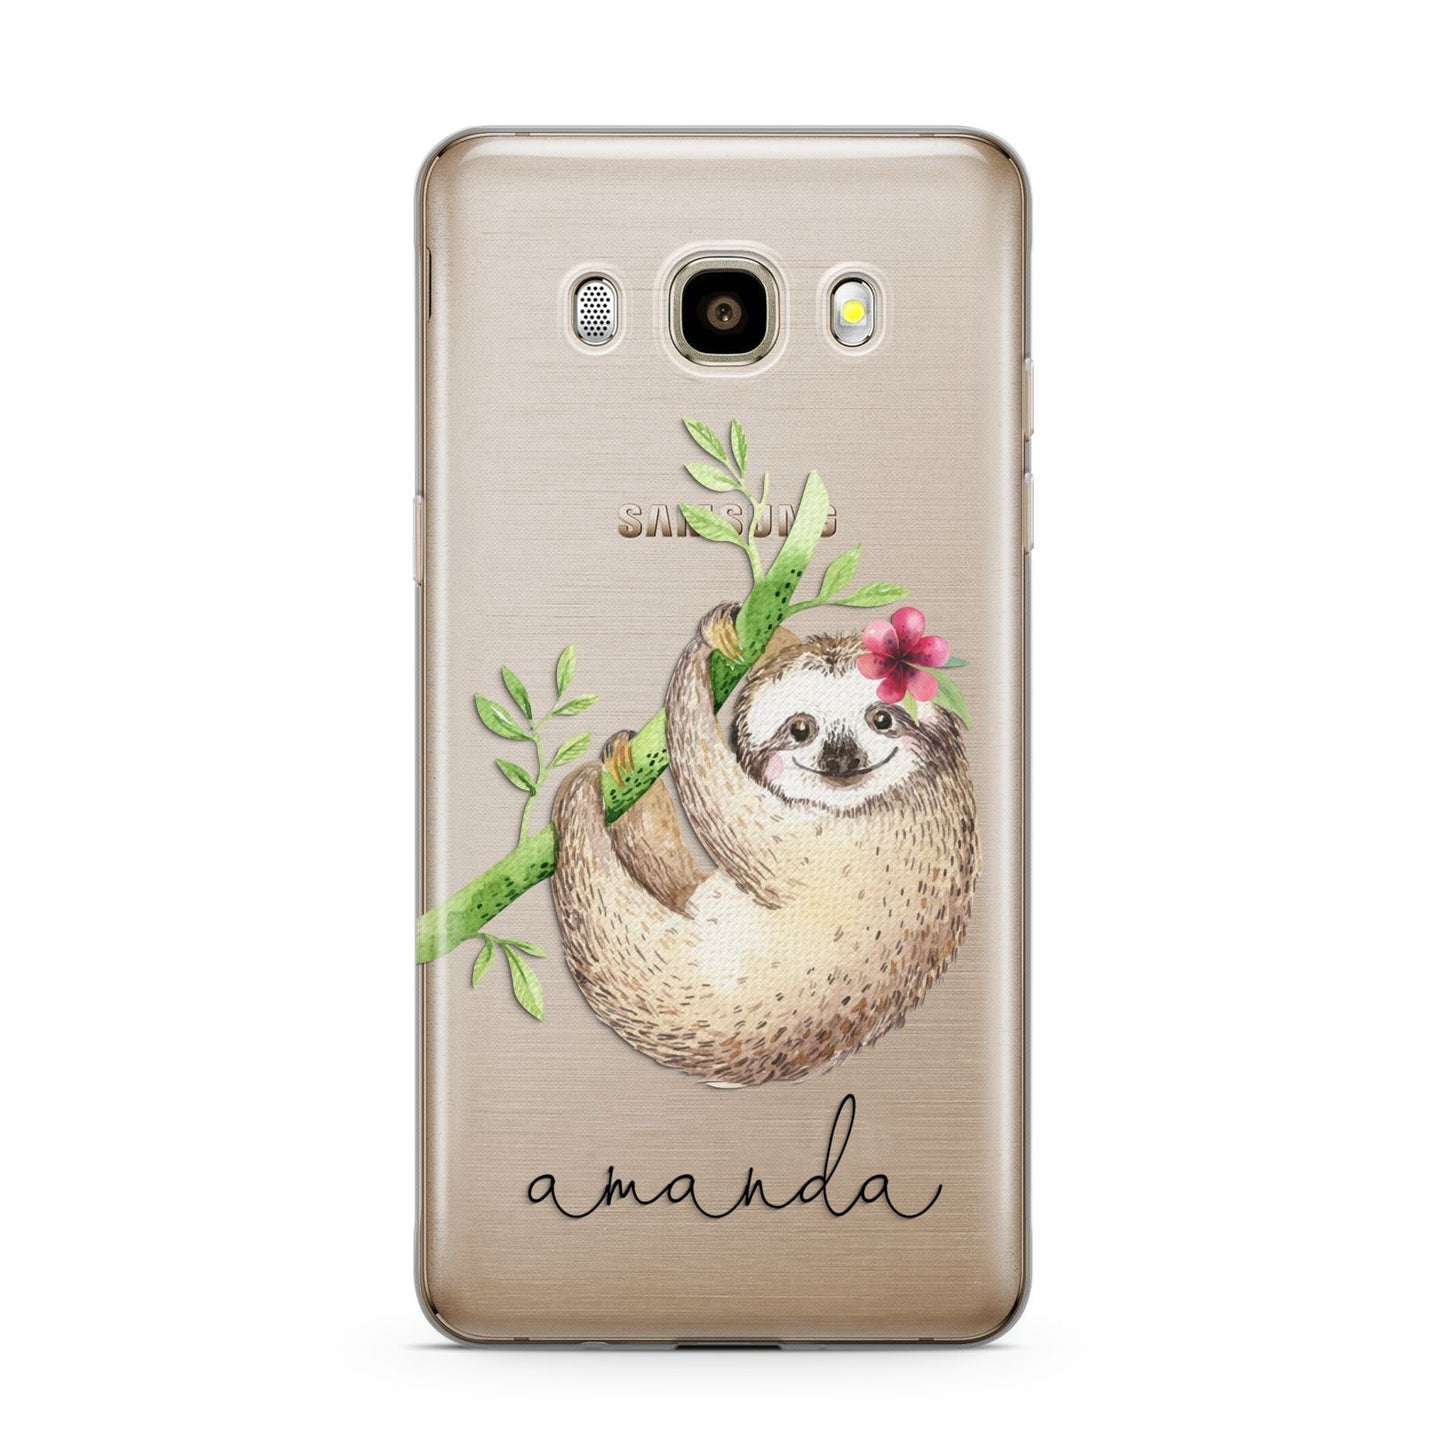 Personalised Sloth Samsung Galaxy J7 2016 Case on gold phone